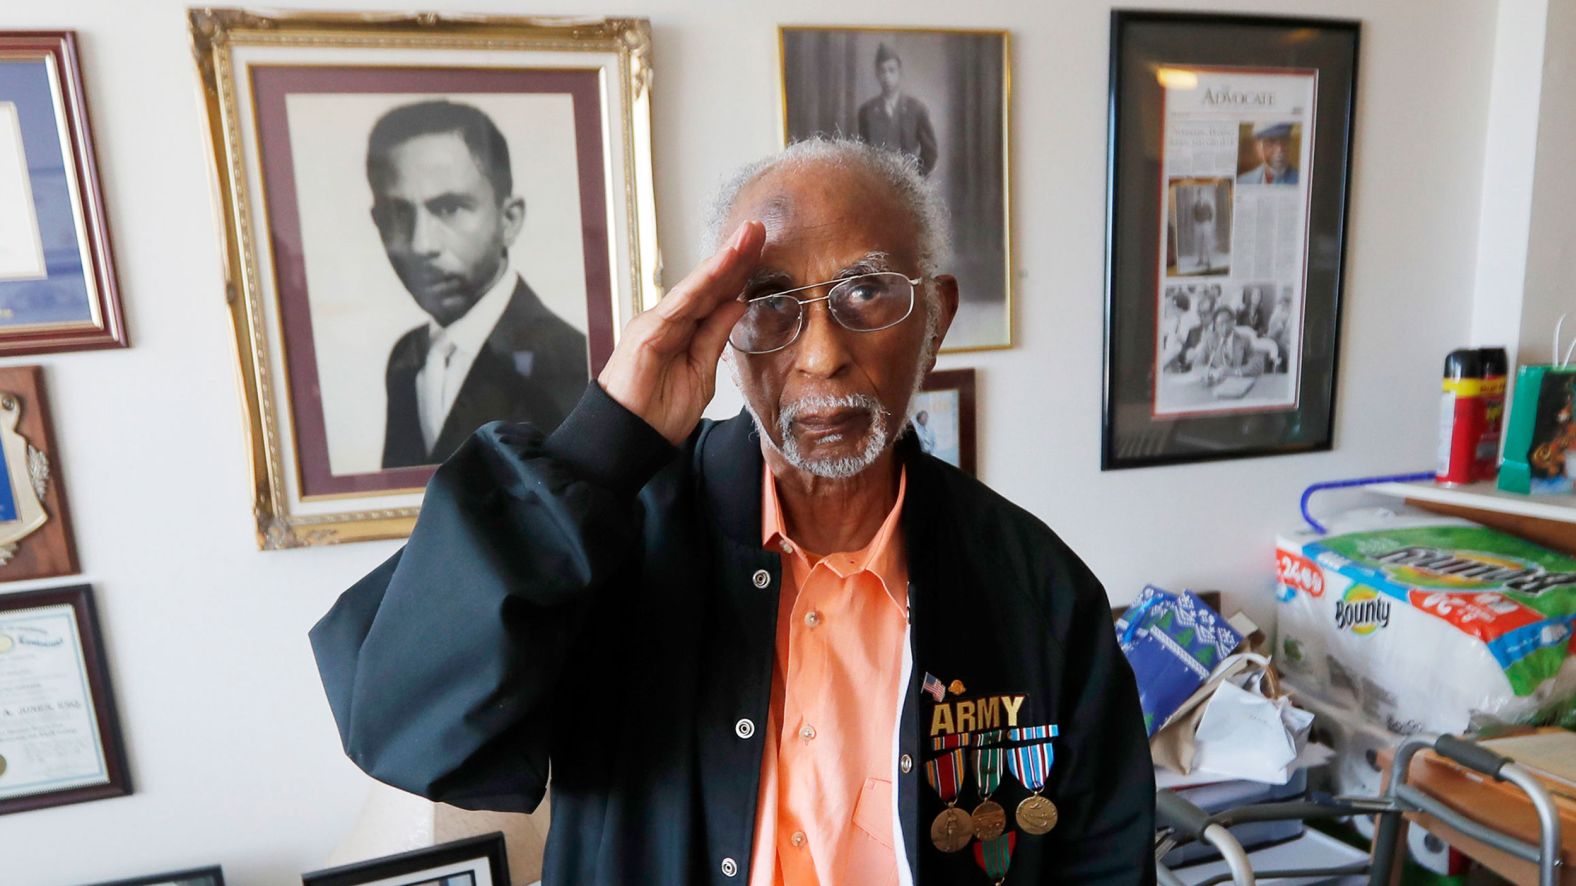 <a href="index.php?page=&url=https%3A%2F%2Fwww.cnn.com%2F2022%2F04%2F26%2Fus%2Fcivil-rights-lawyer-wwii-veteran-johnnie-jones%2Findex.html" target="_blank">Johnnie Jones Sr., </a>a decorated World War II veteran and pioneering civil rights lawyer, died at the age of 102, according to the Louisiana Department of Veterans Affairs on April 25.